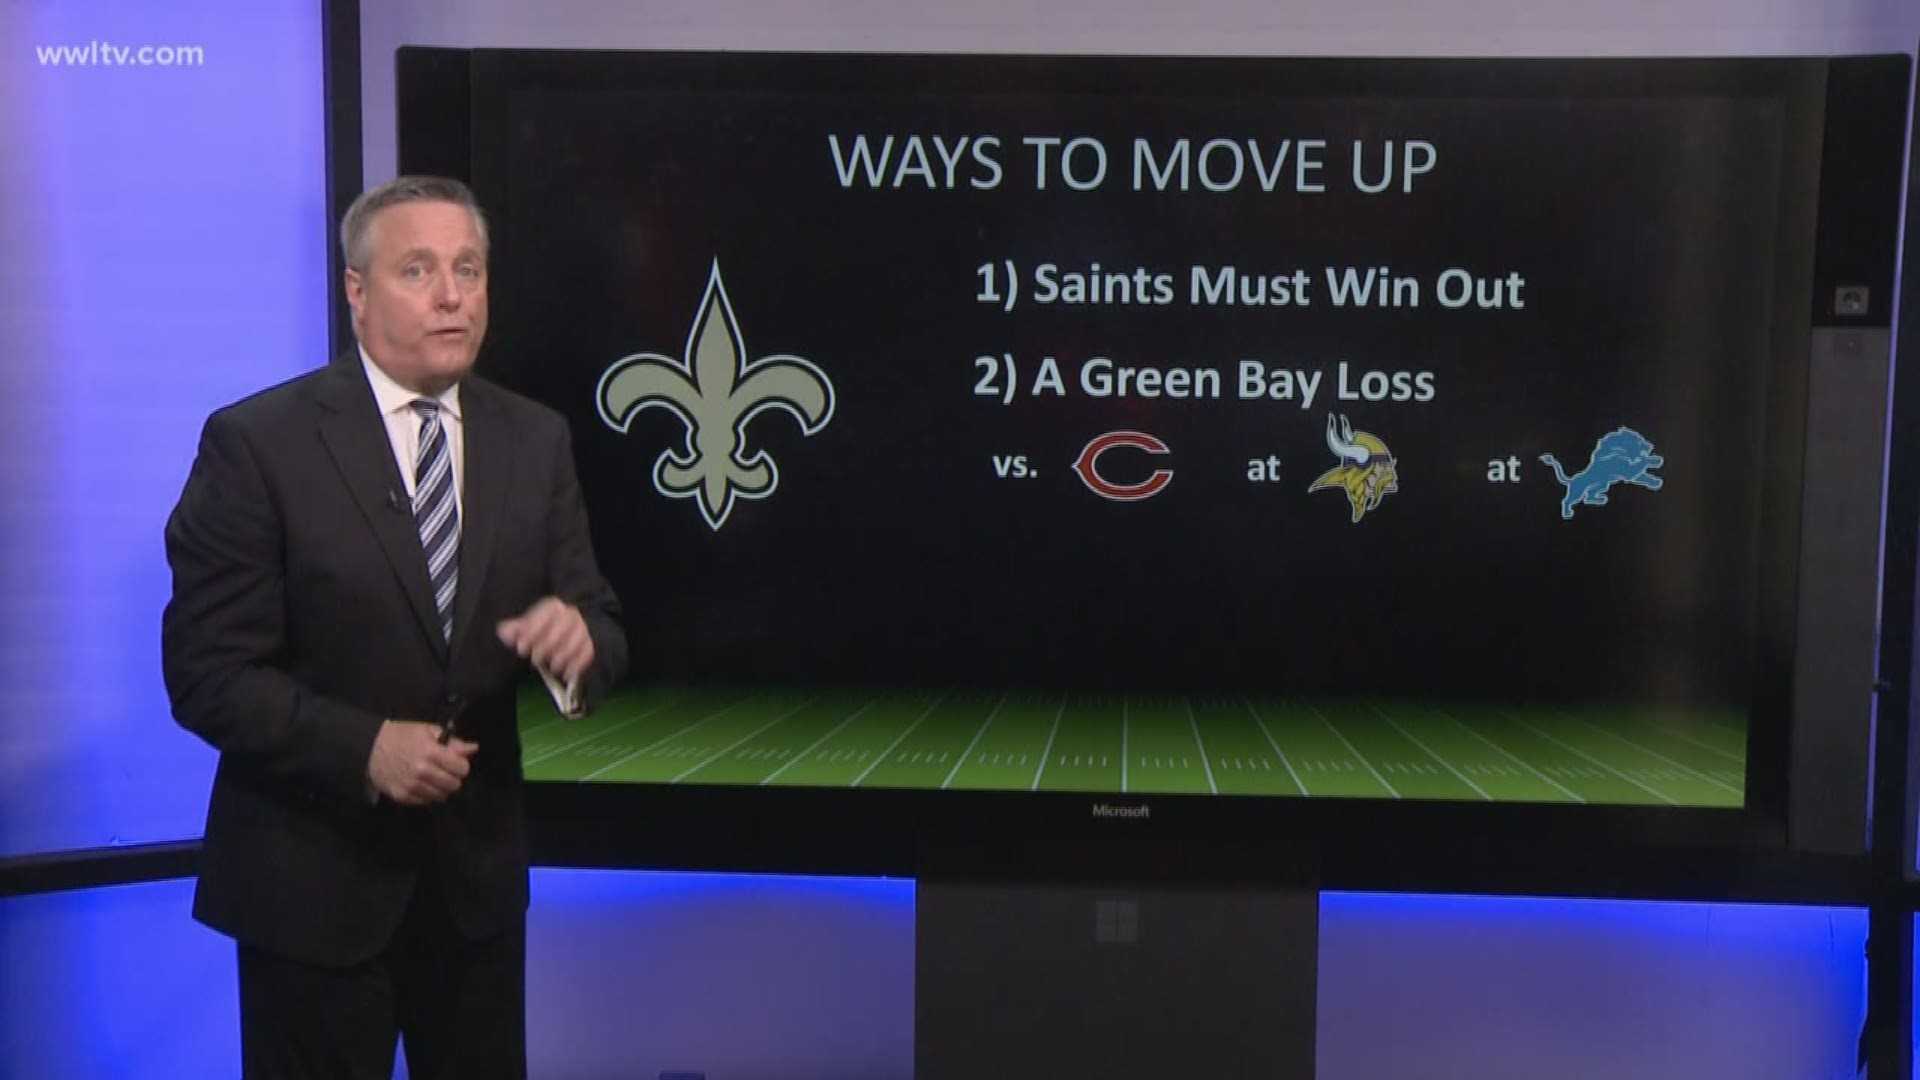 Saints and Seahawks have to win out and Green Bay needs to lose, so New Orleans can get the No. 1 seed.